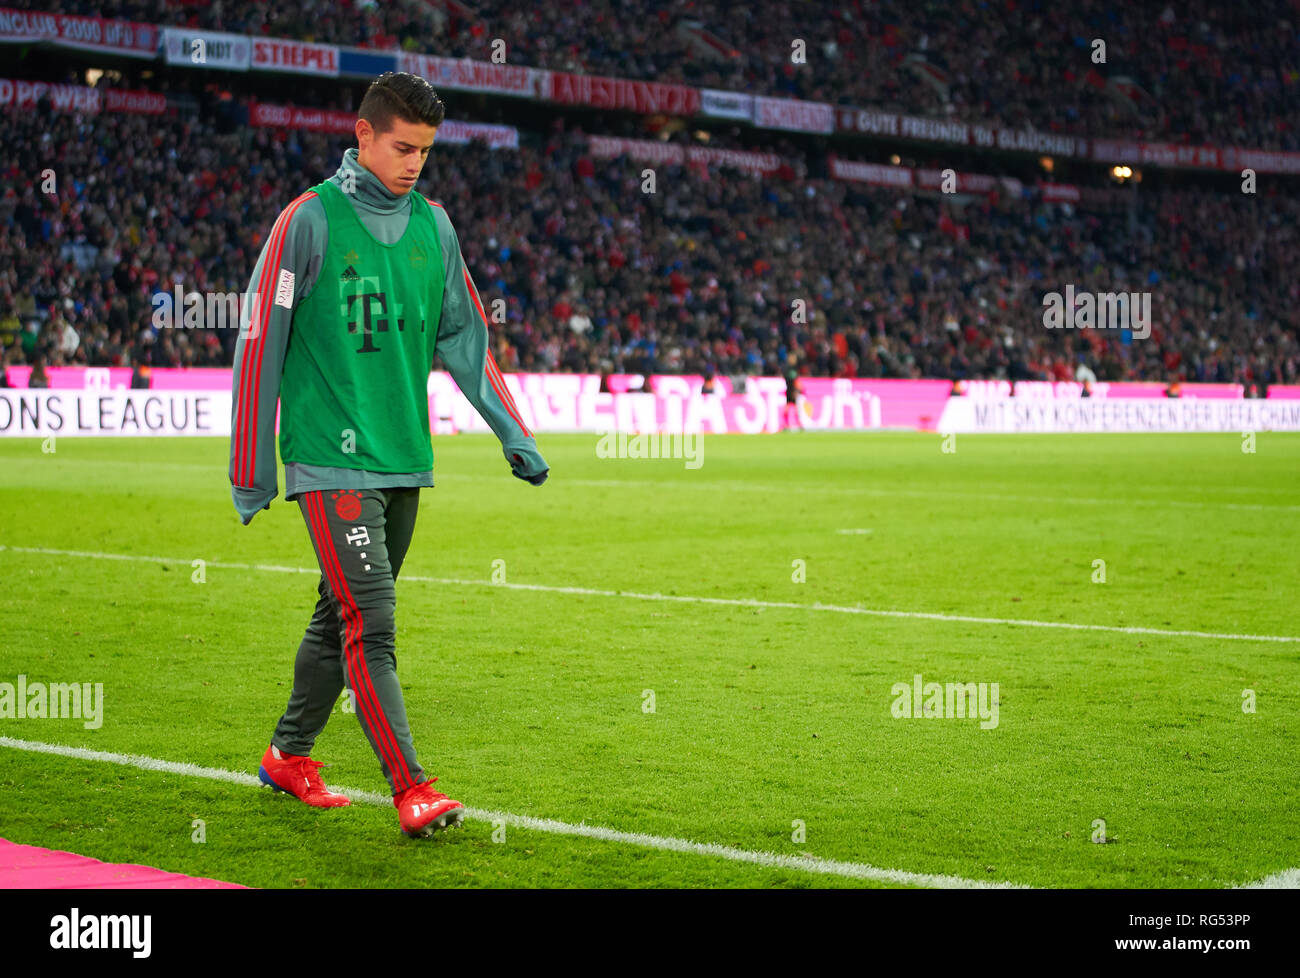 James RODRIGUEZ, FCB 11 Gymnastics, stretching, warming up, warm-up, preparation for the game, sad, disappointed, angry, Emotions, disappointment, frustration, frustrated, sadness, desperate, despair,  FC BAYERN MUNICH - VFB STUTTGART 4-1  - DFL REGULATIONS PROHIBIT ANY USE OF PHOTOGRAPHS as IMAGE SEQUENCES and/or QUASI-VIDEO -  1.German Soccer League , Munich, January 27, 2019     Stock Photo